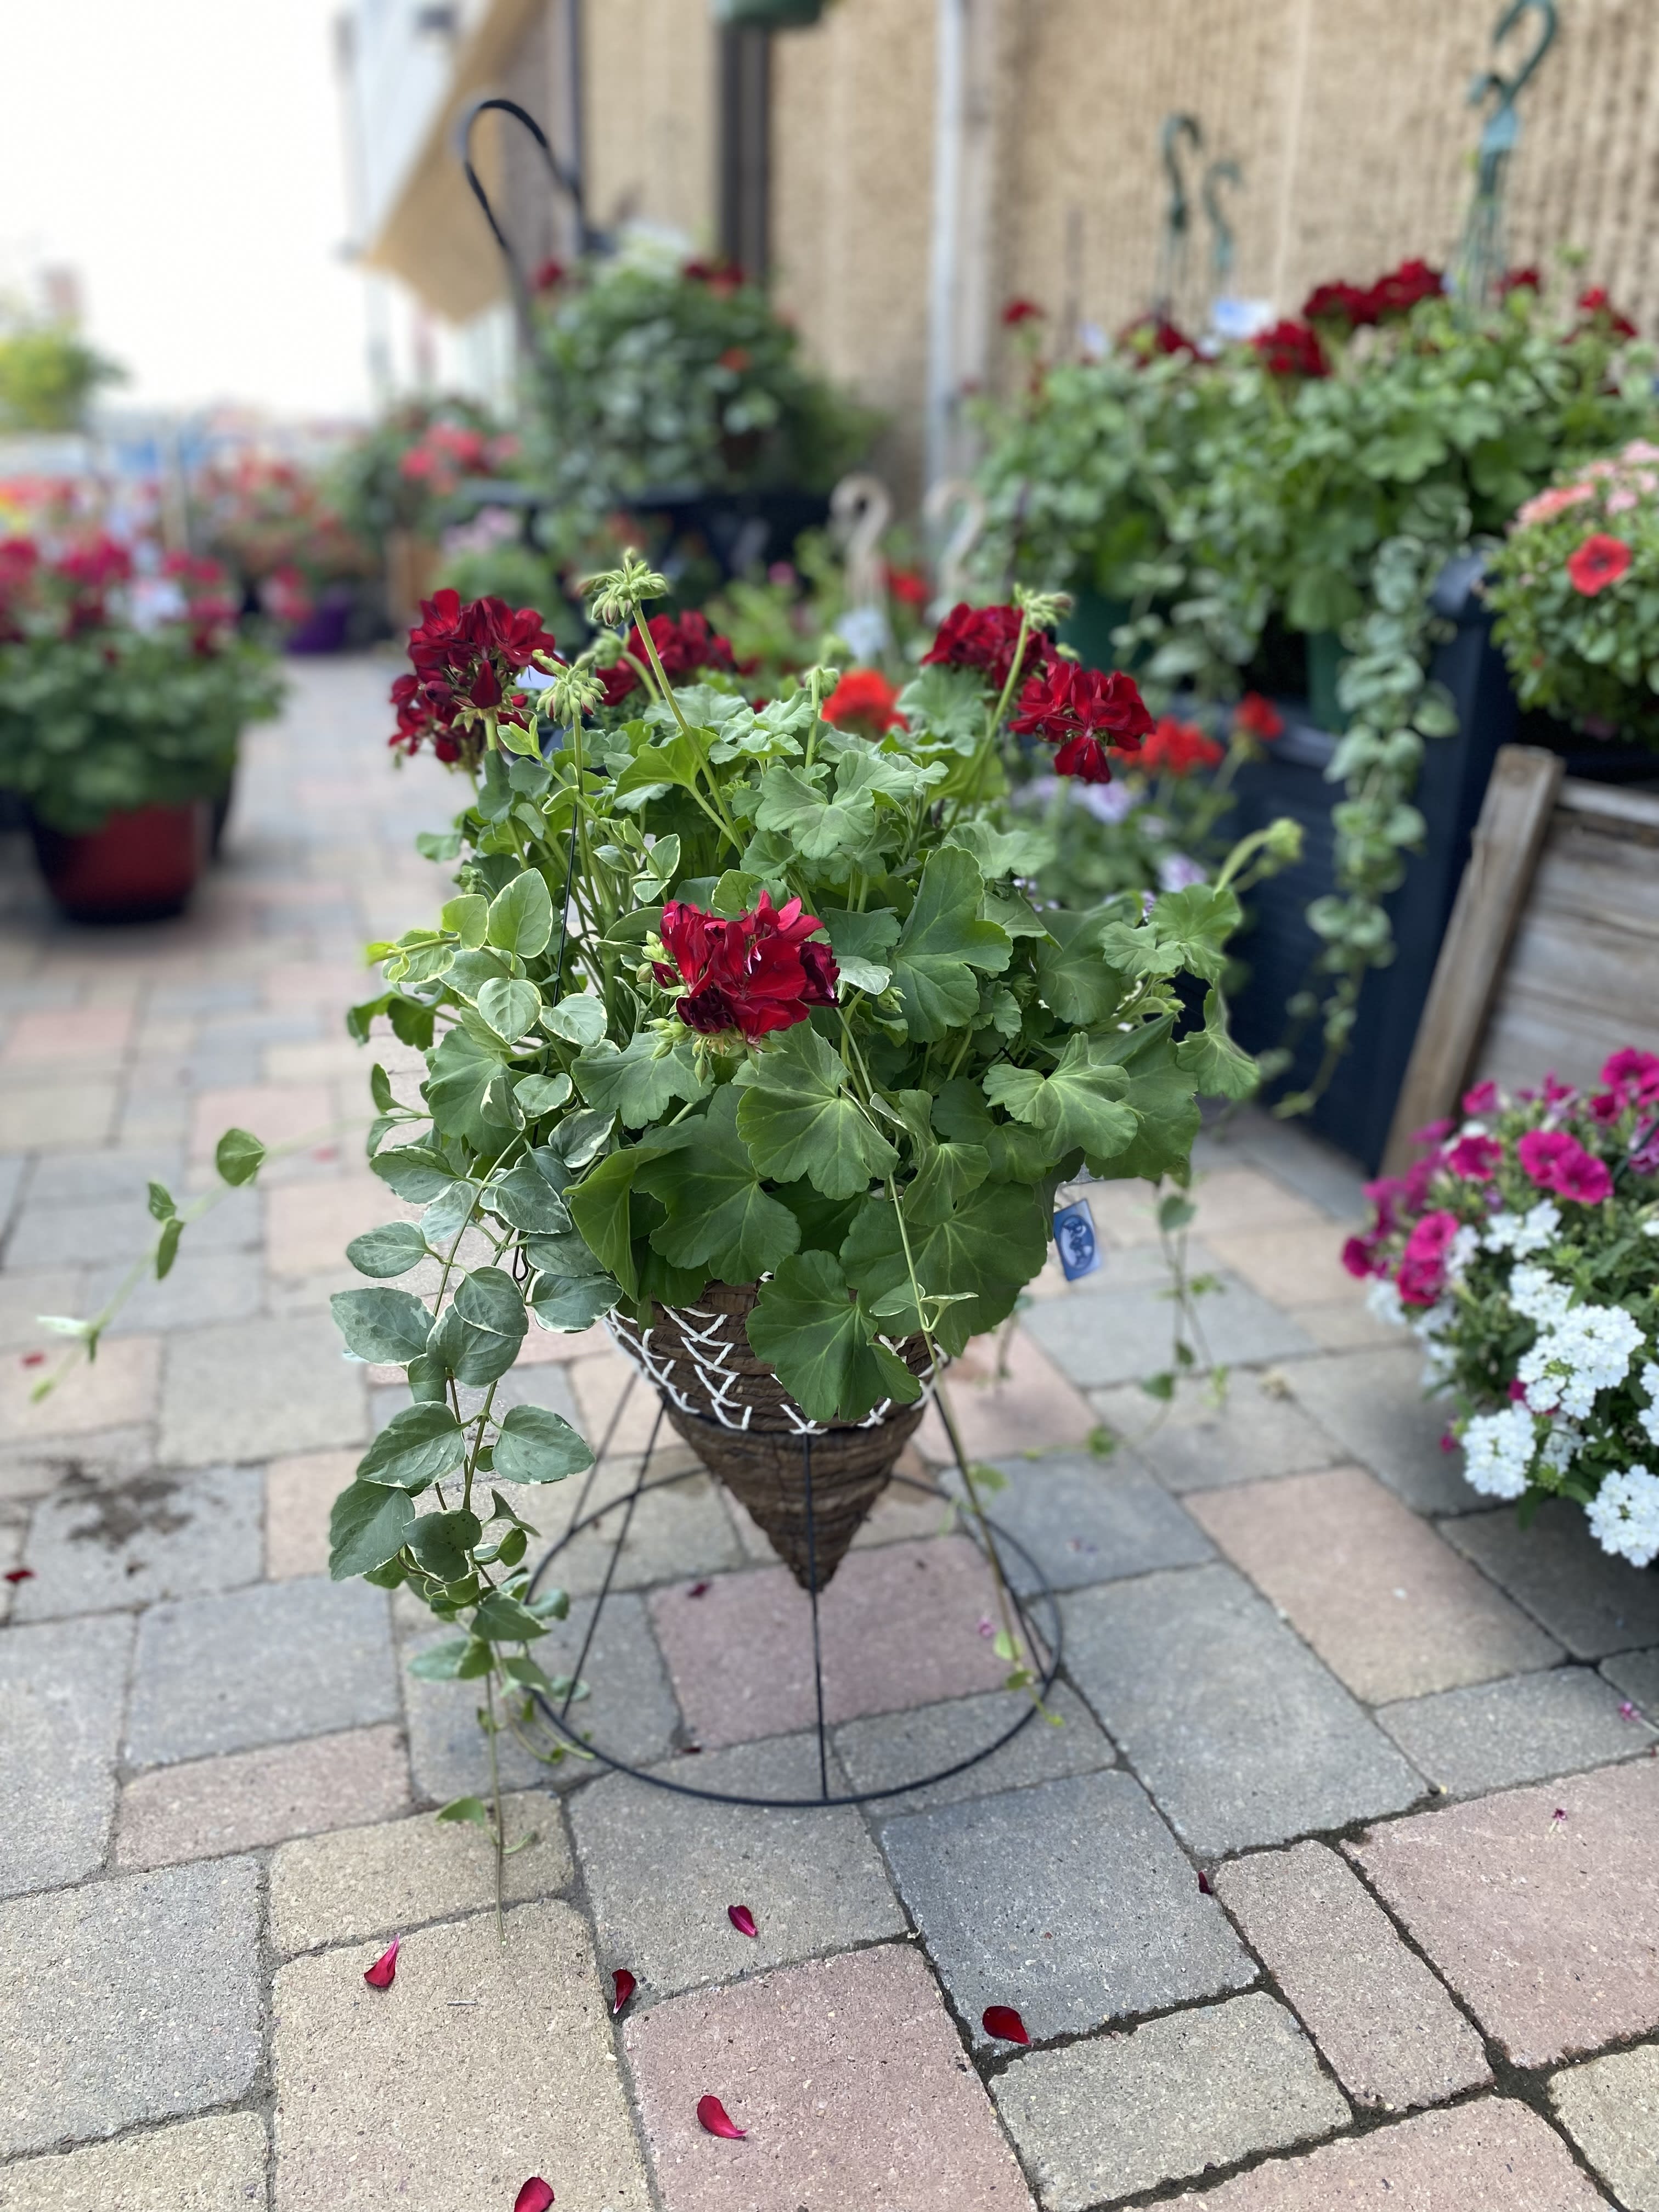 Outdoor Basket Pots- Can be for hanging or patio - New this year, basket cone pots! Filled with geraniums and other plants, they can be hung or left to sit on patio. 